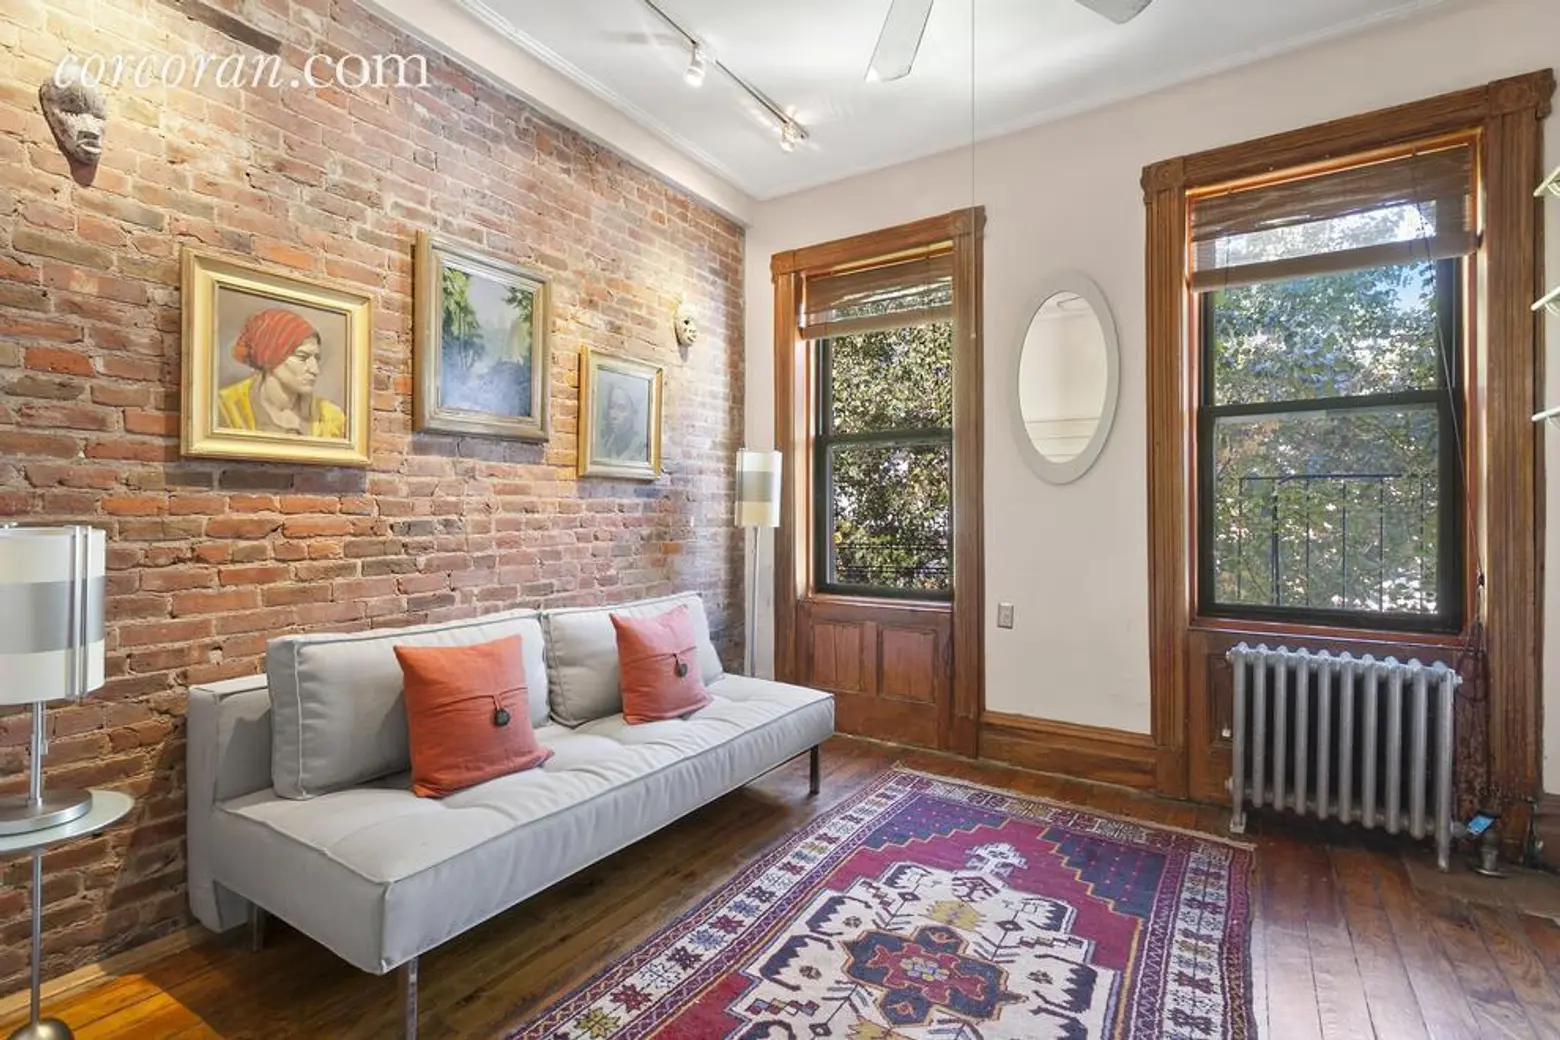 $1.41M for an opportunity to combine two West Village units into one lovely apartment